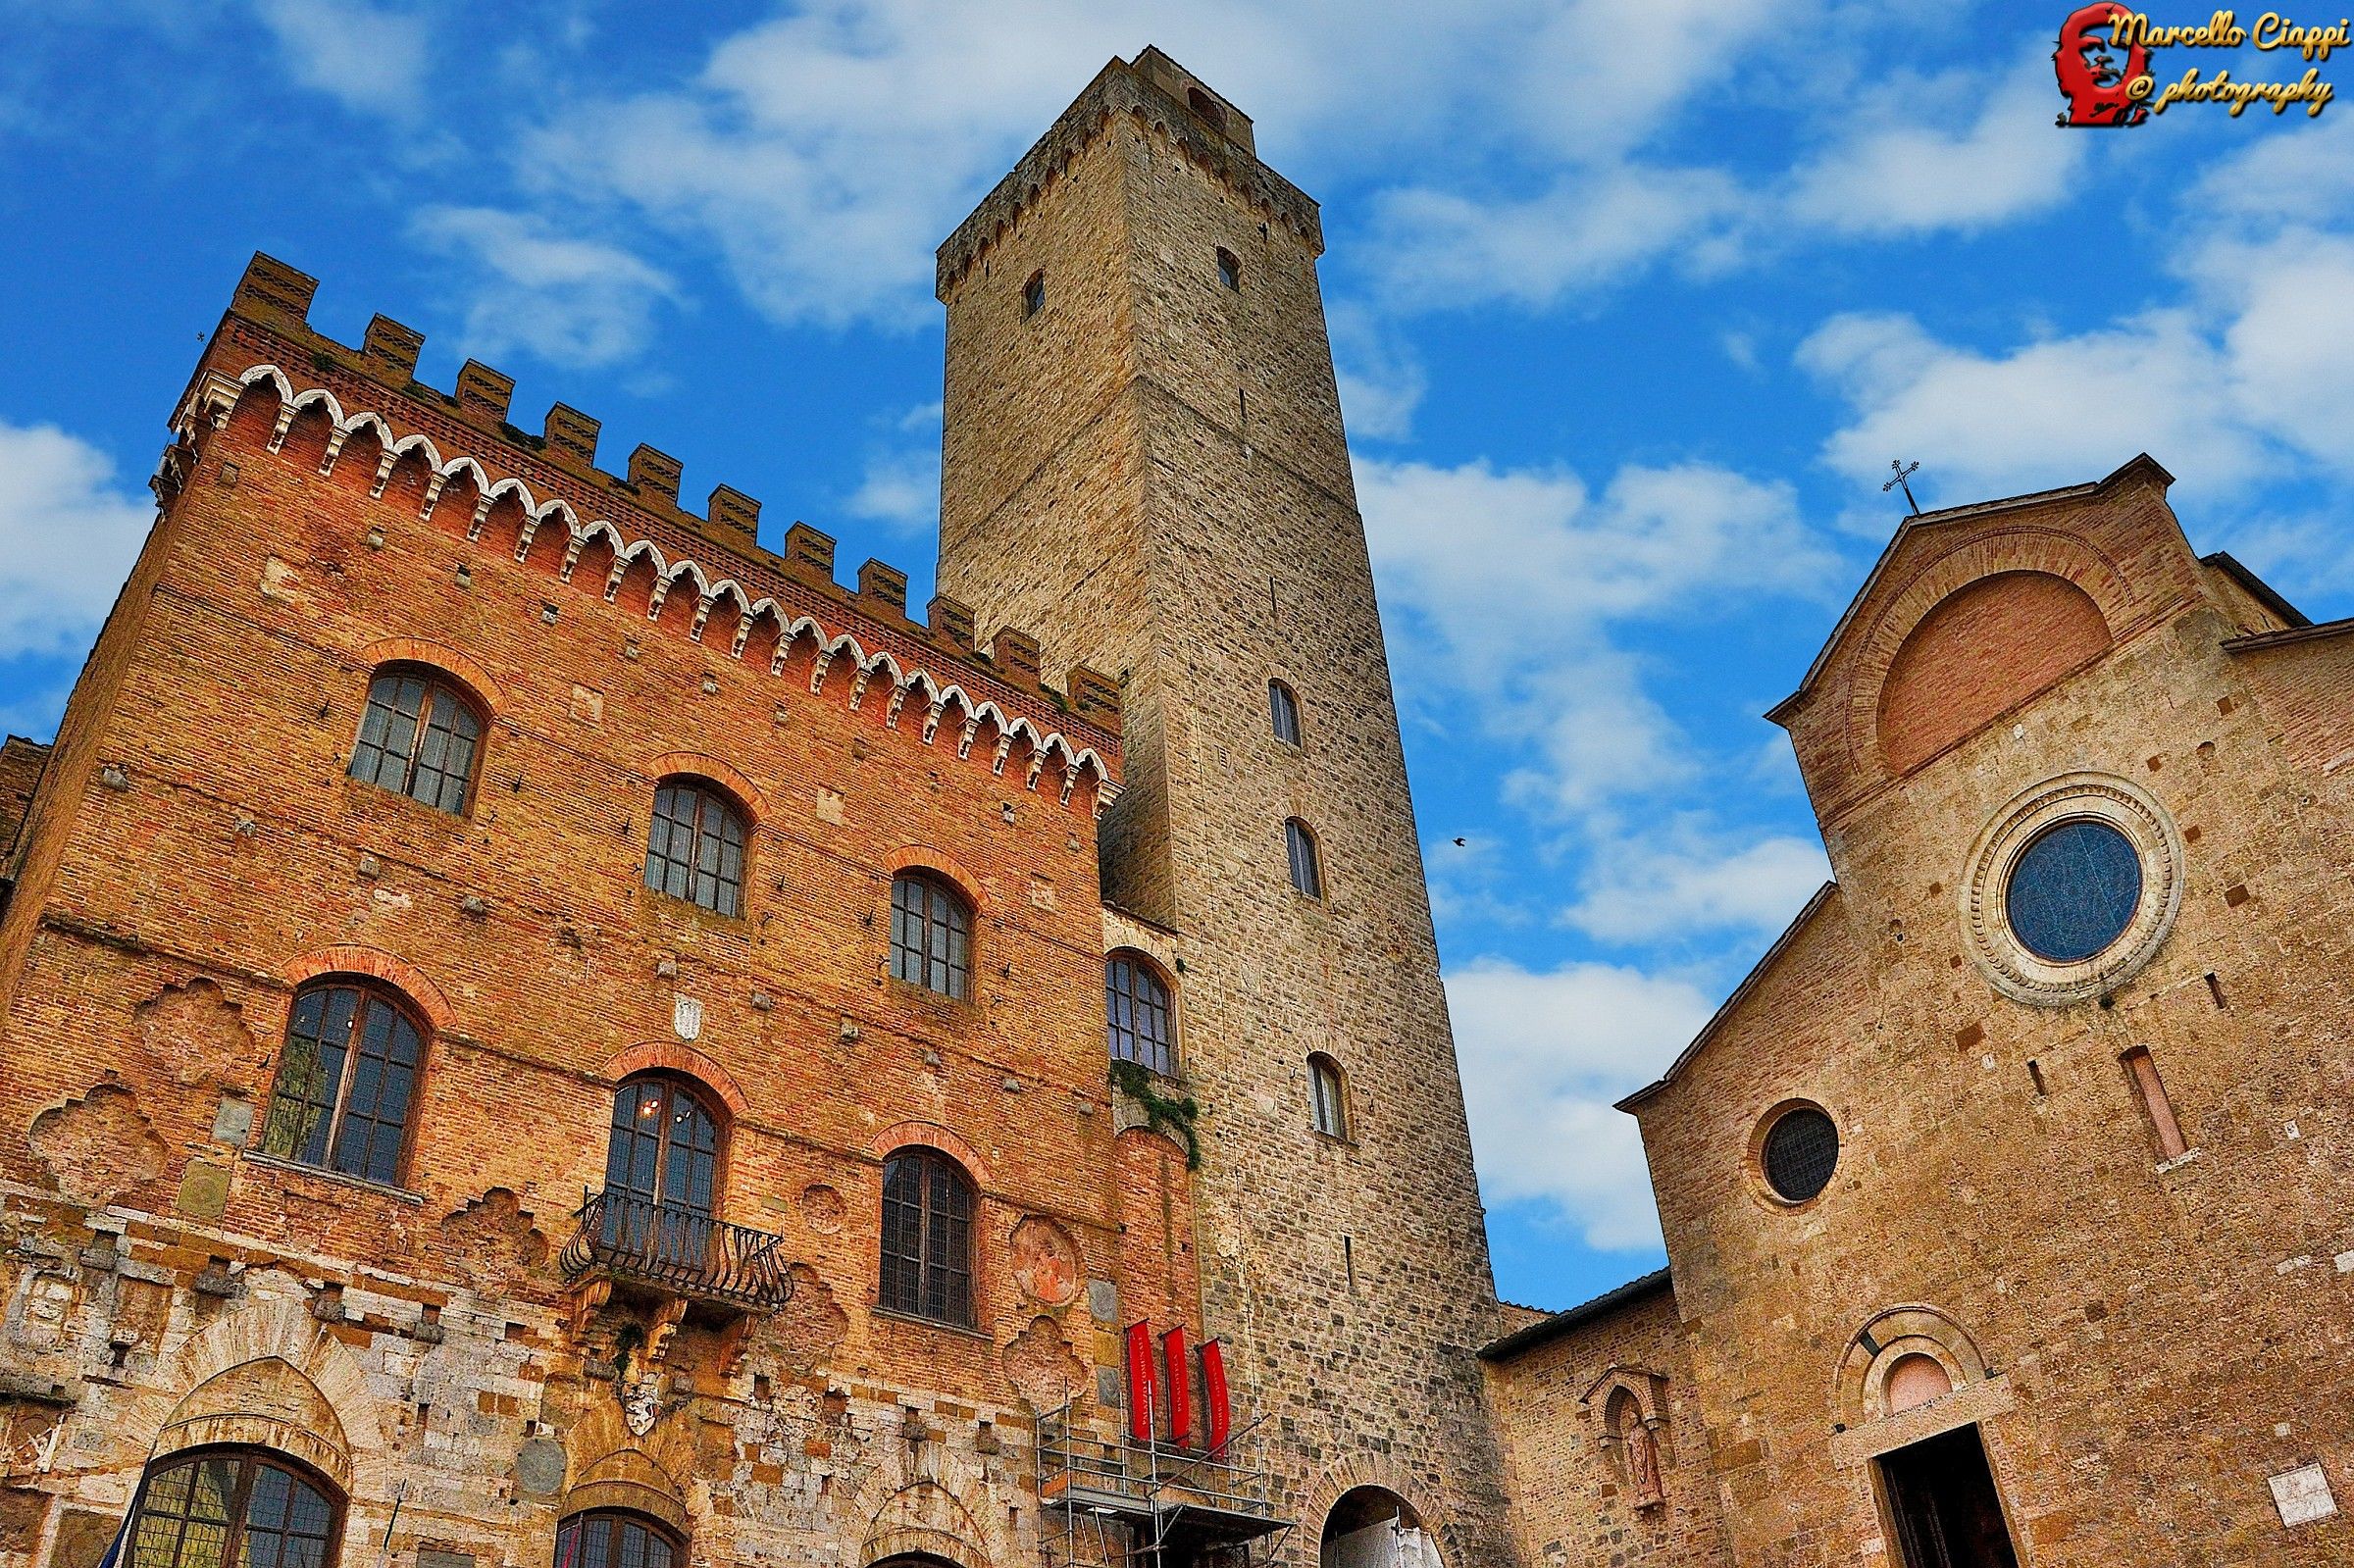 San Gimignano - Town Hall Tower-Grosso-The Cathedral...